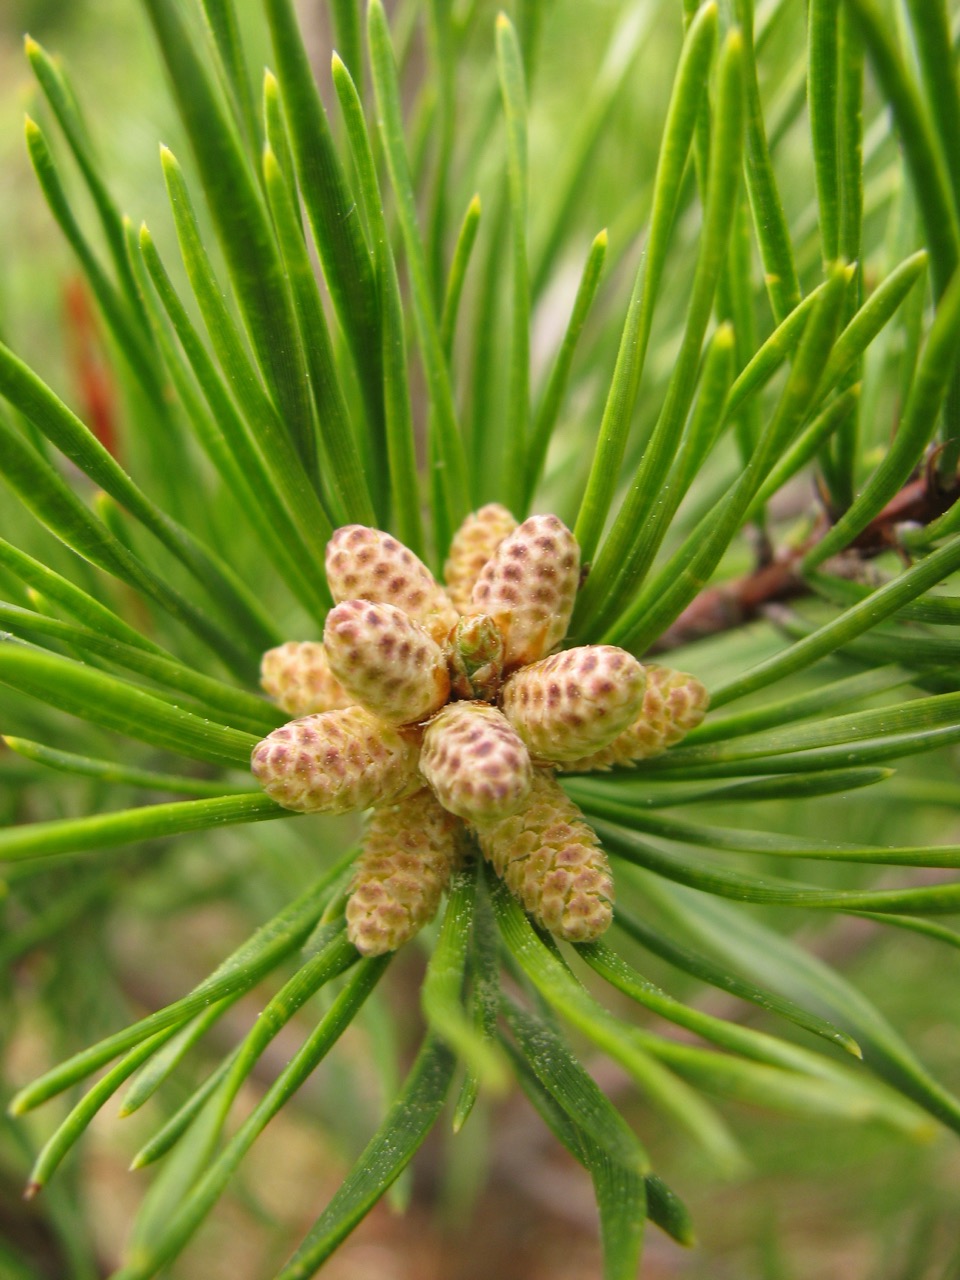 The Scientific Name is Pinus virginiana. You will likely hear them called Virginia Pine, Scrub Pine, Jersey Pine. This picture shows the Pollen cones in early April of Pinus virginiana